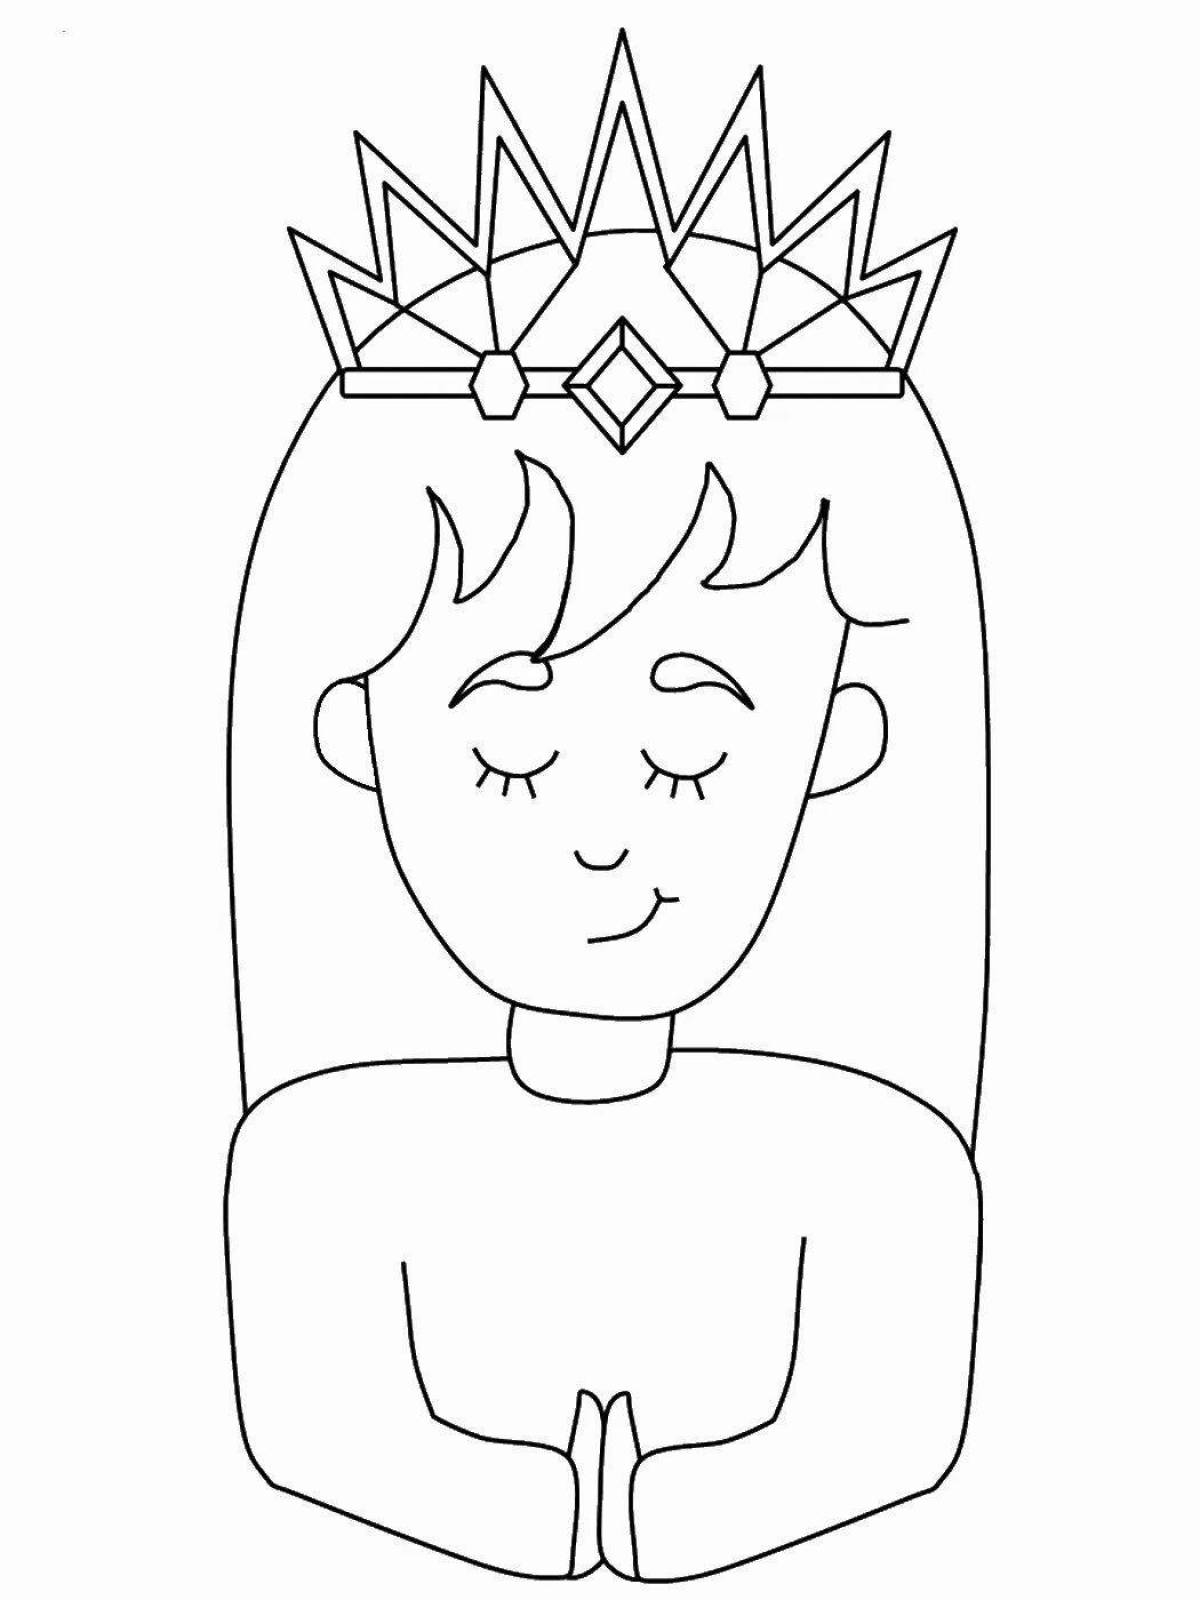 Gorgeous coloring page queen